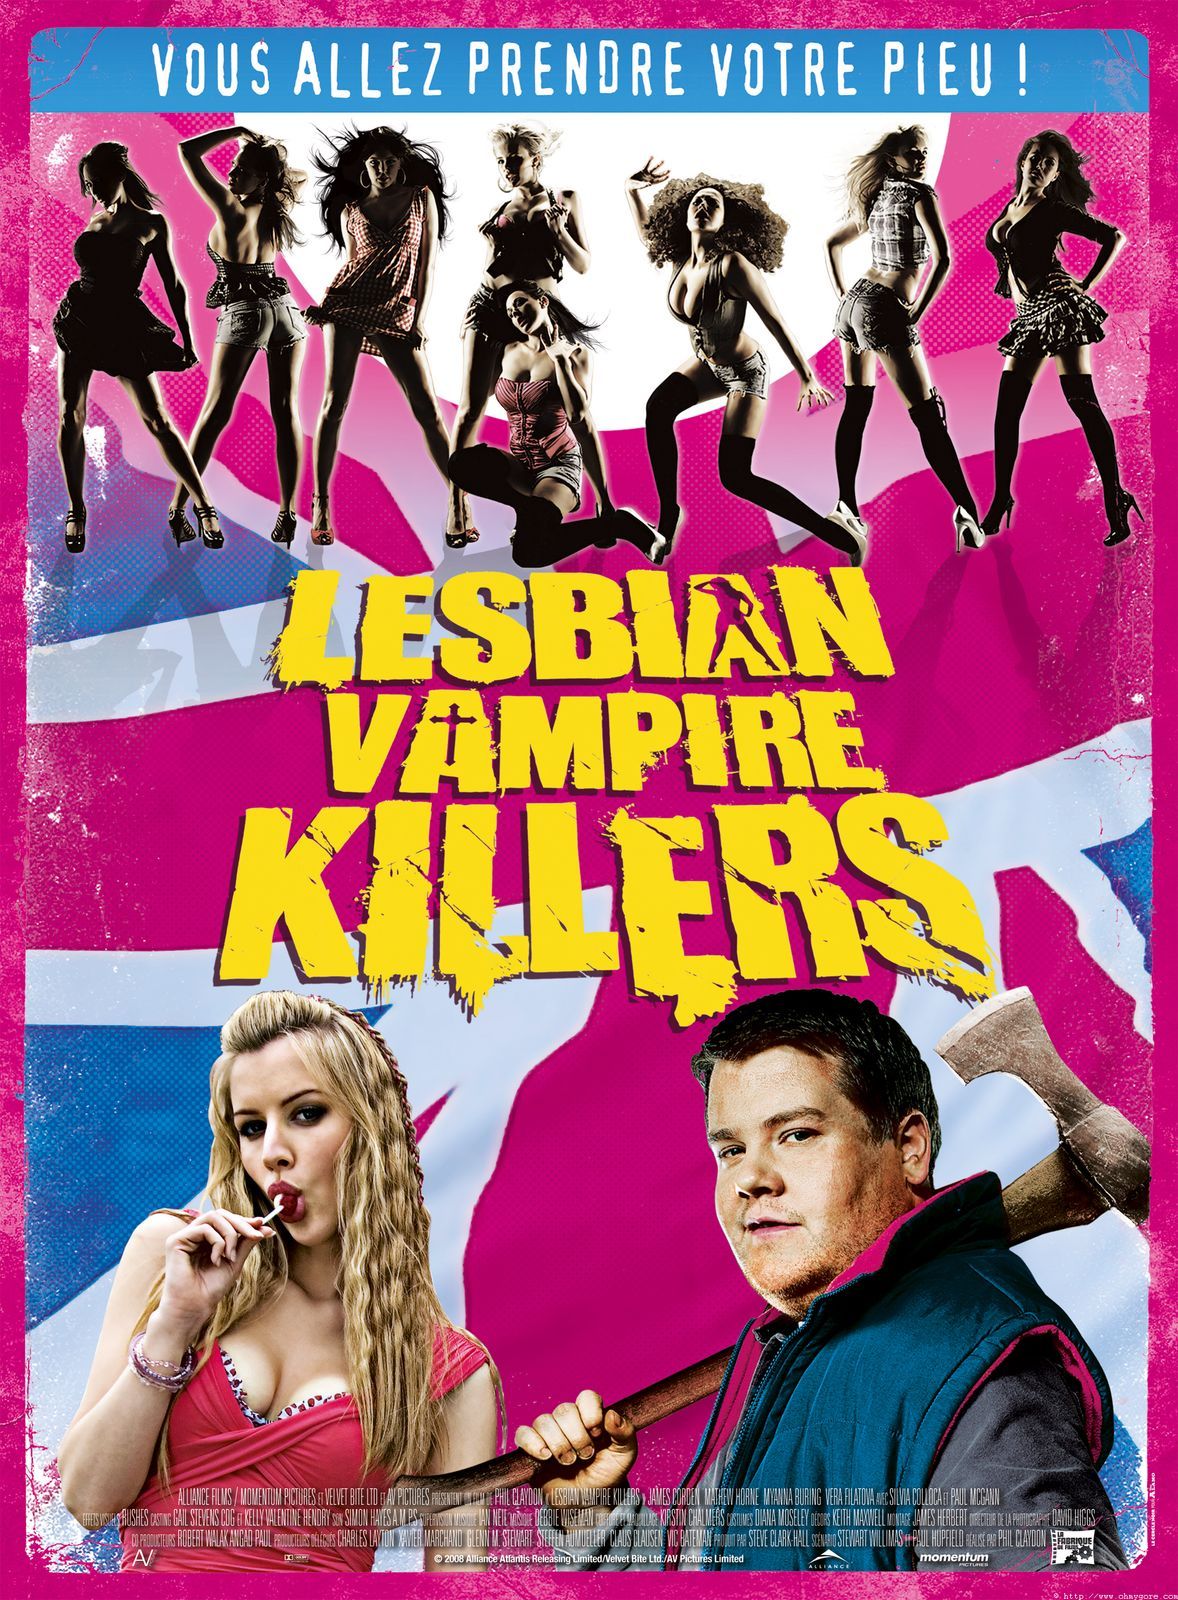 Extreme lesbian movies online